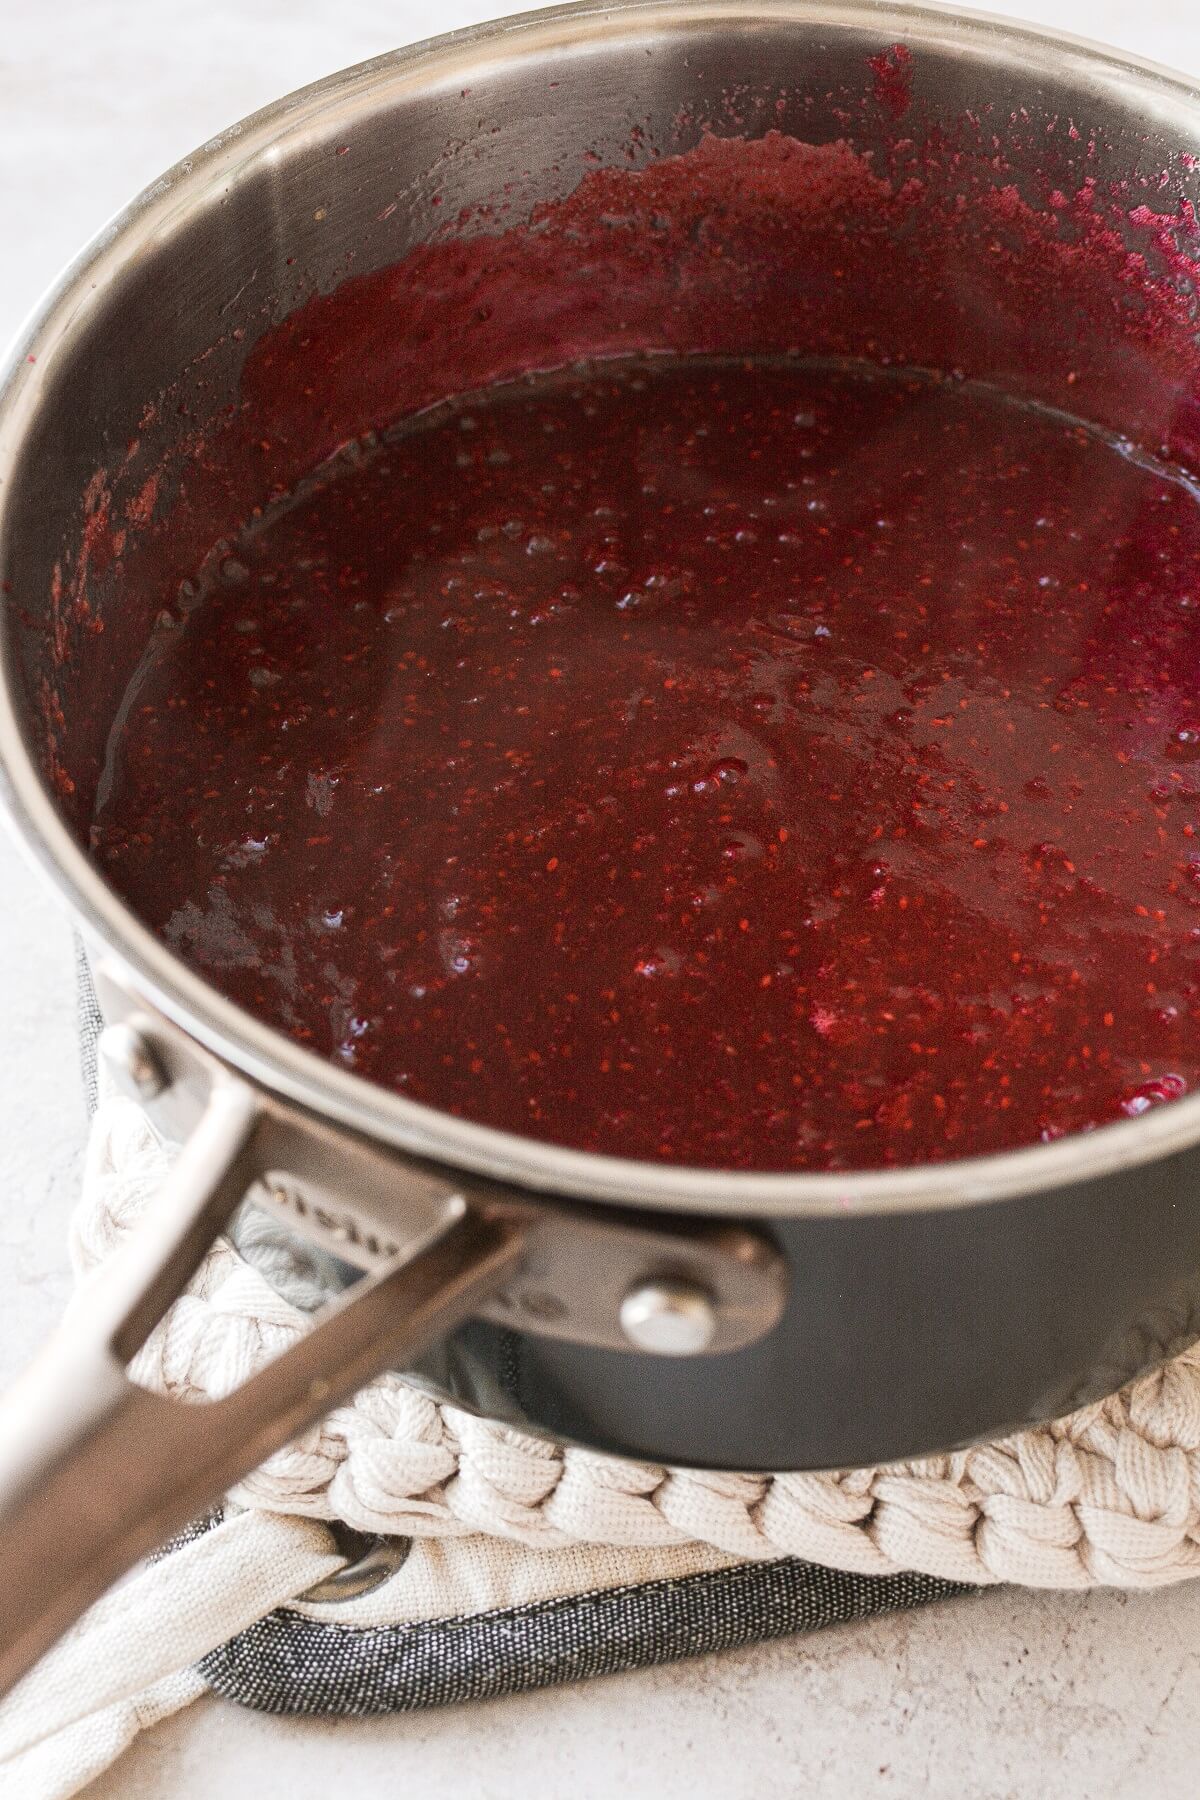 Homemade cranberry jelly, pureed in a saucepan.